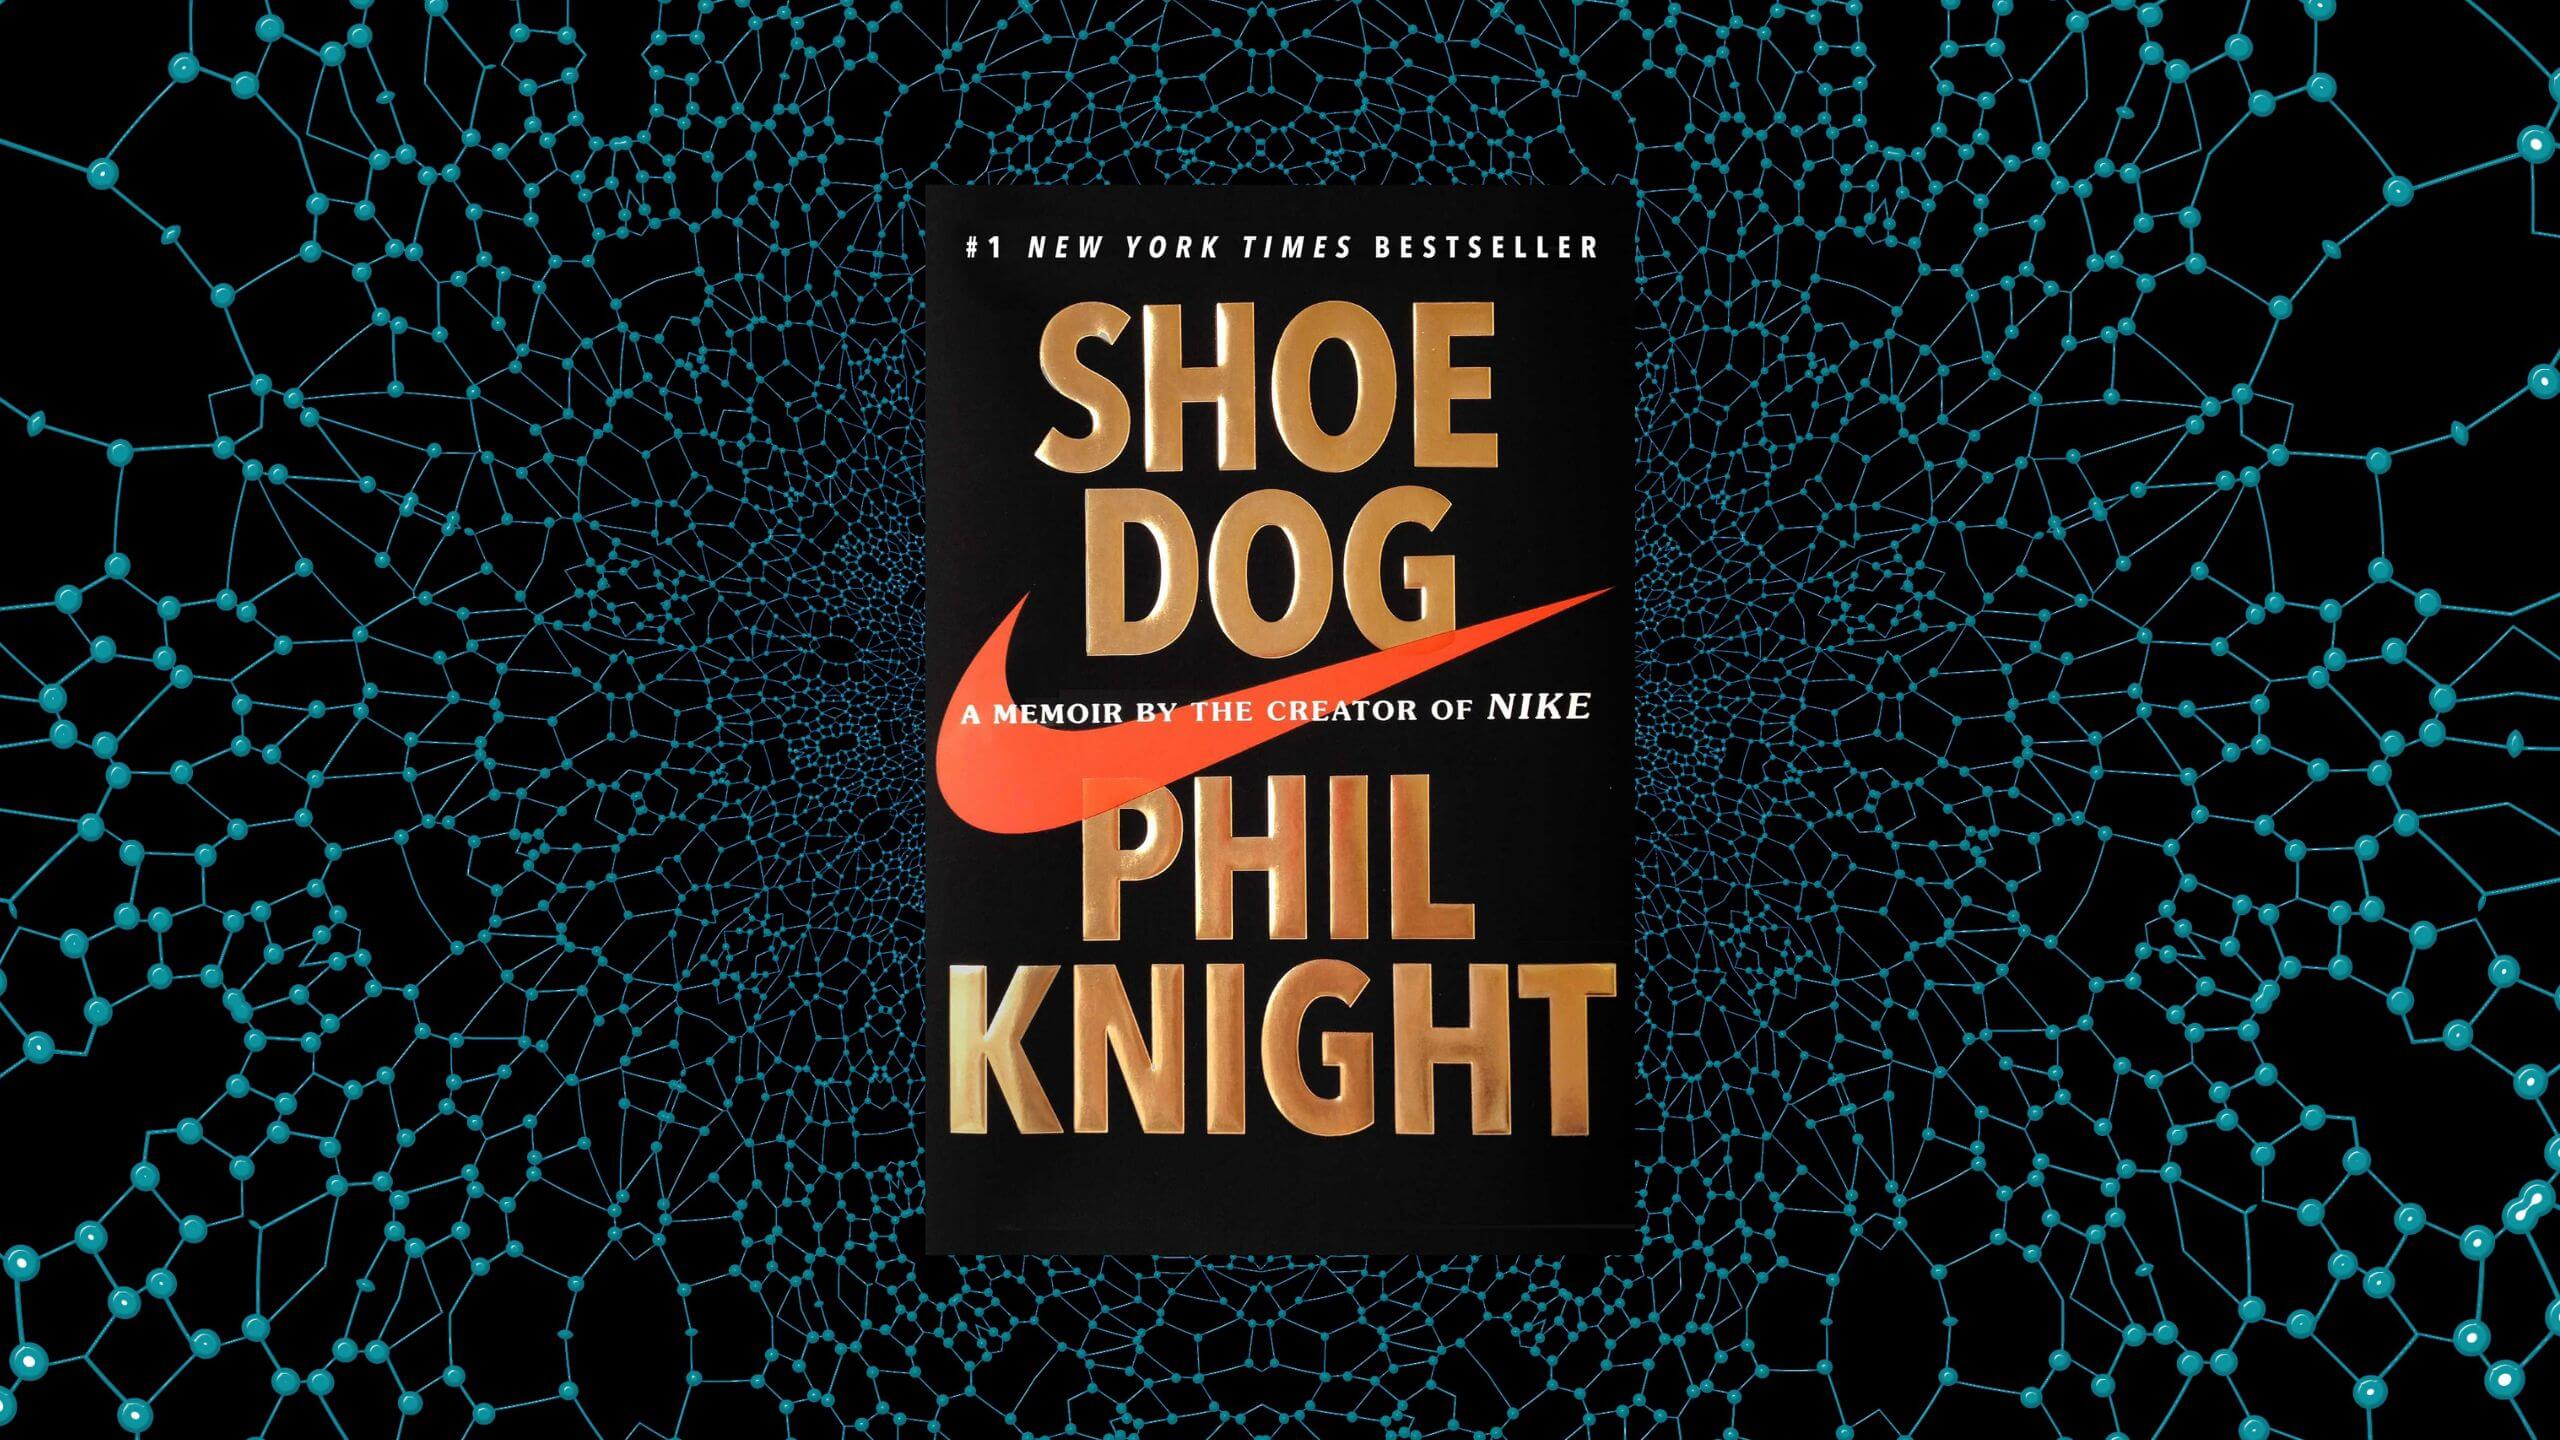 The Shoe Dog: Learn From Buck Knight